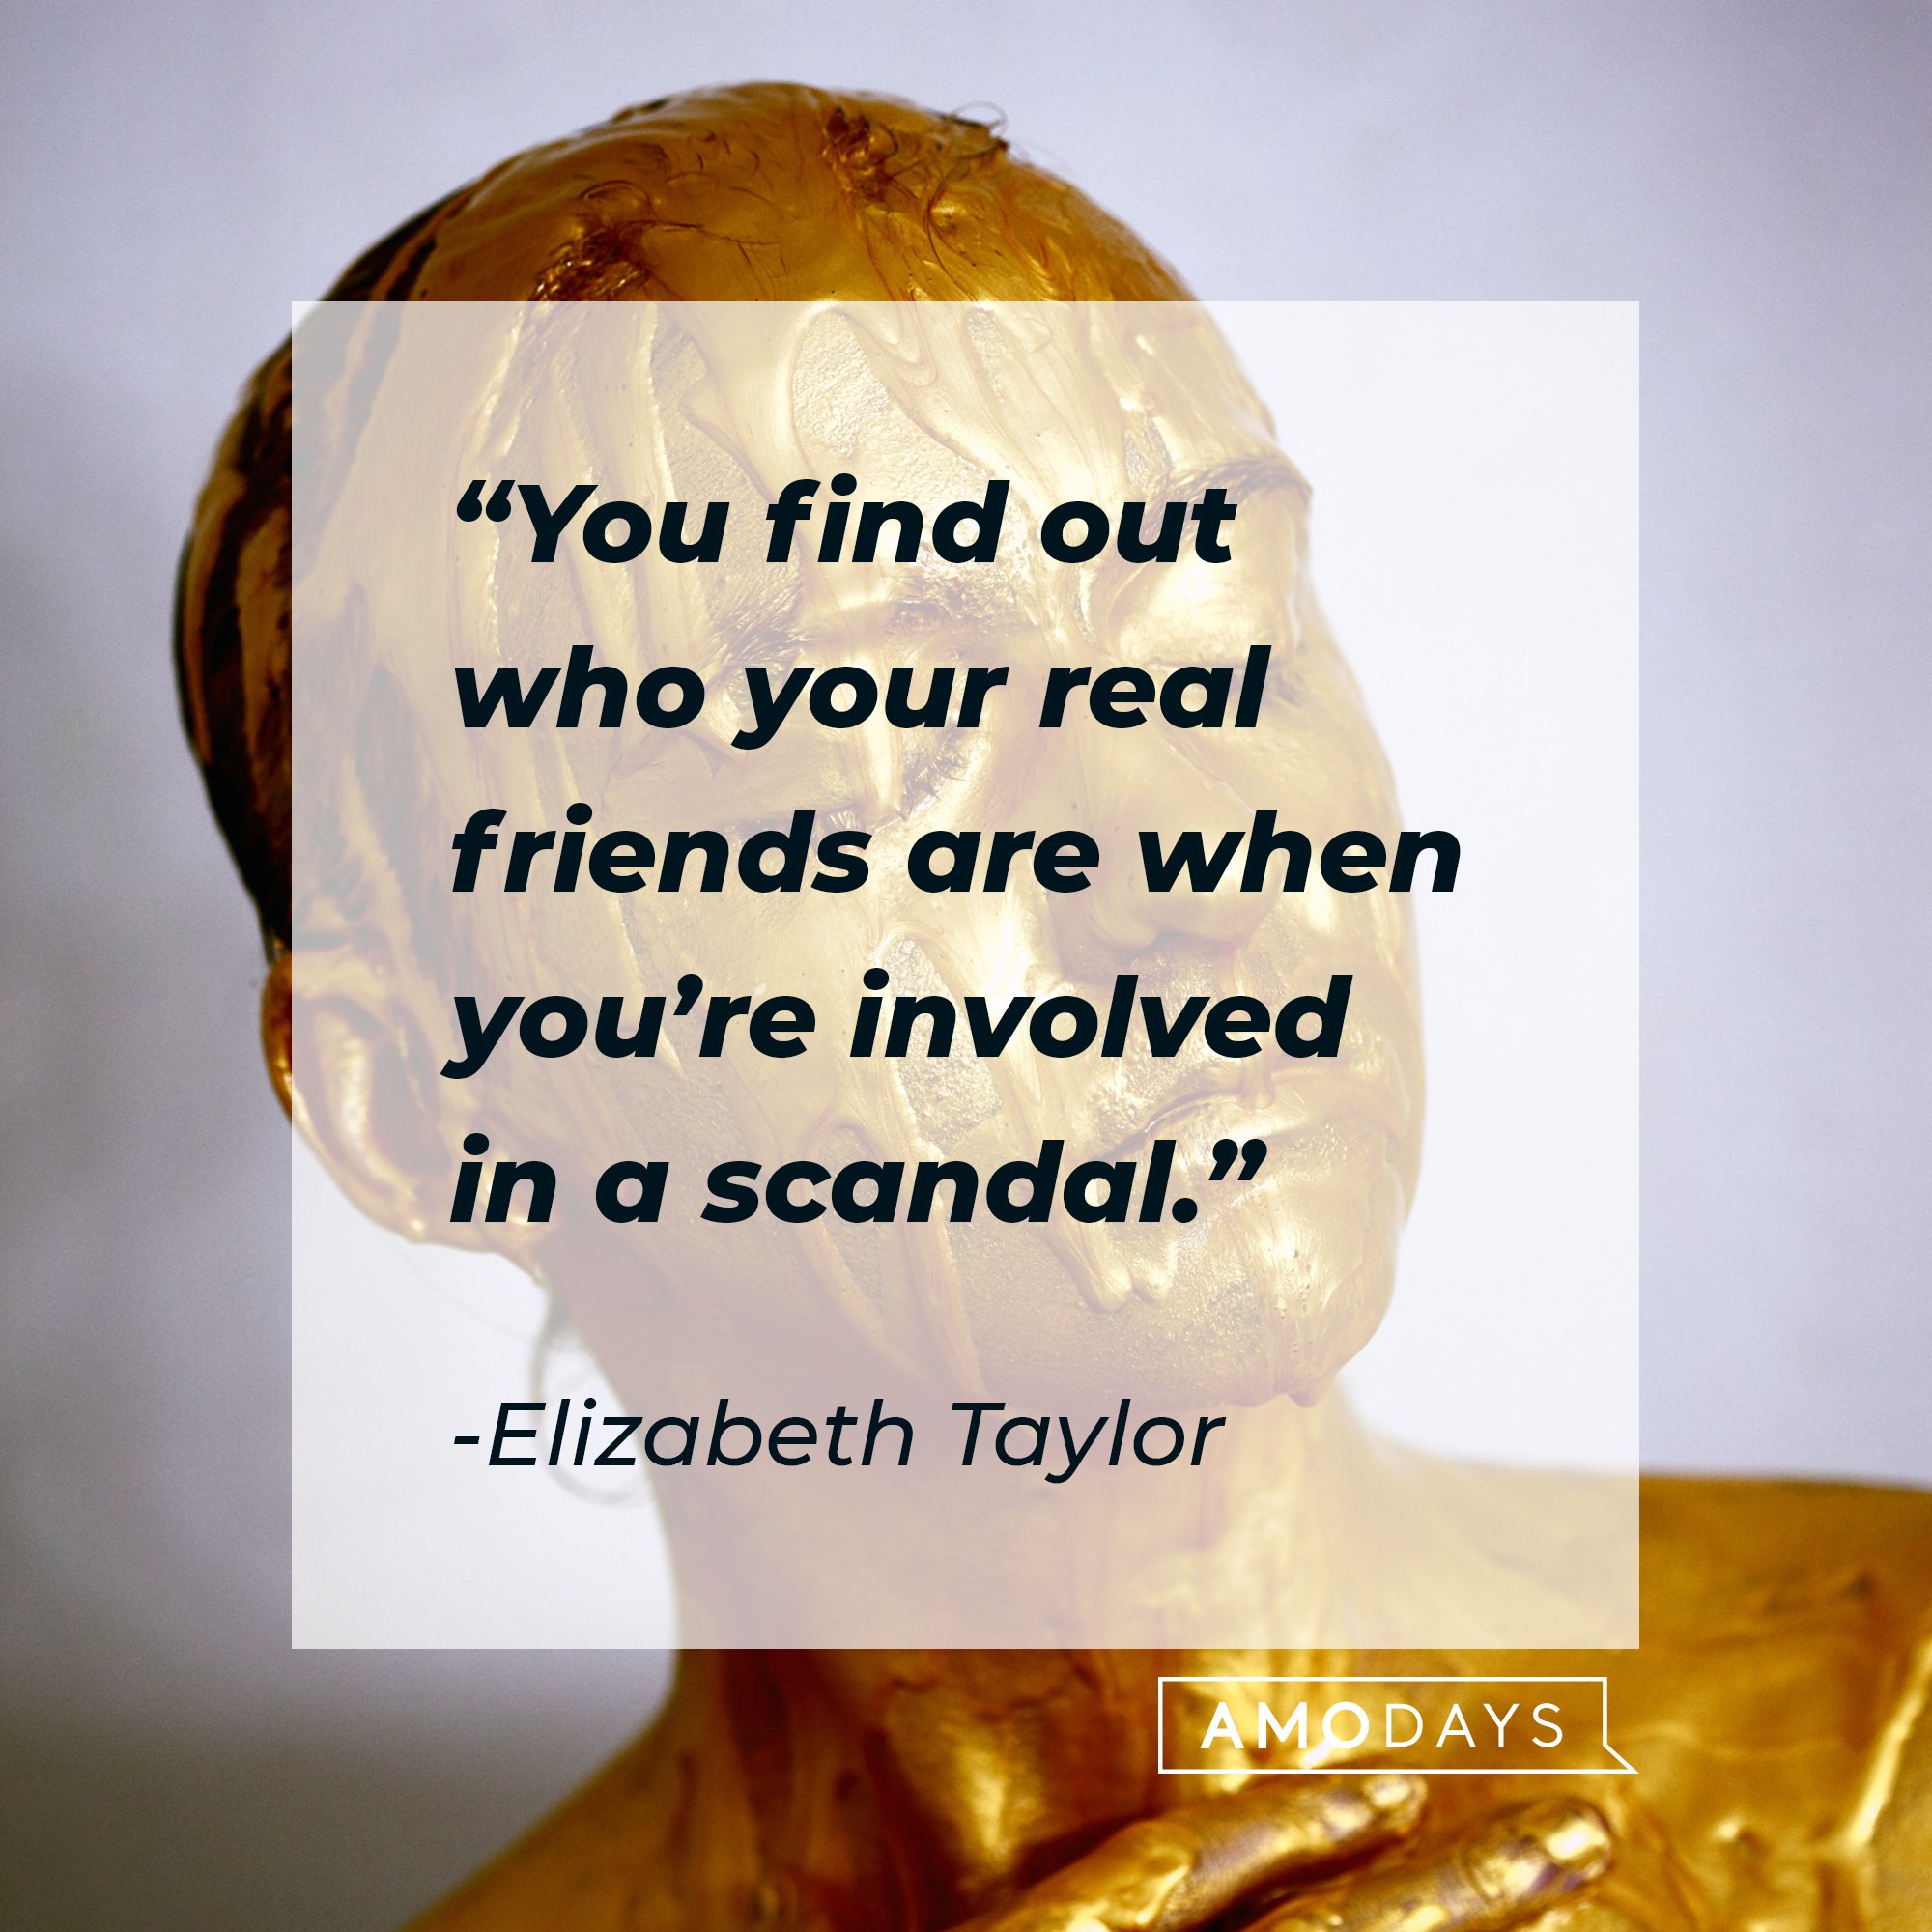 Elizabeth Taylor’s quote: “You find out who your real friends are when you’re involved in a scandal.”  | Image: AmoDays